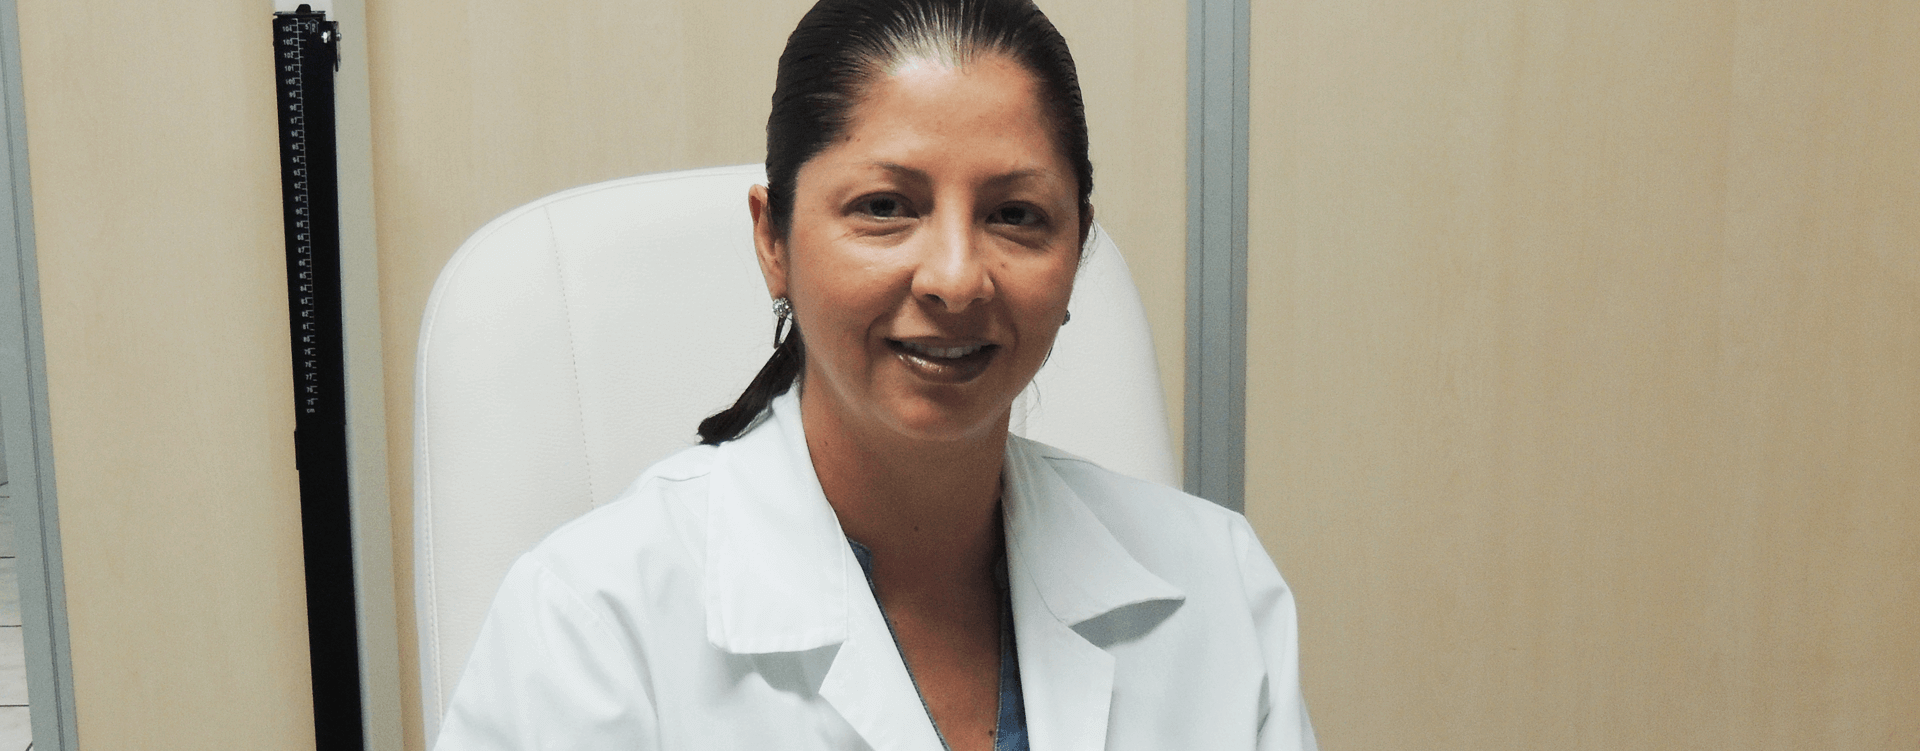 Picture of Dr. Caballero, Laser Specialist at the Premier Laser Center of Costa Rica